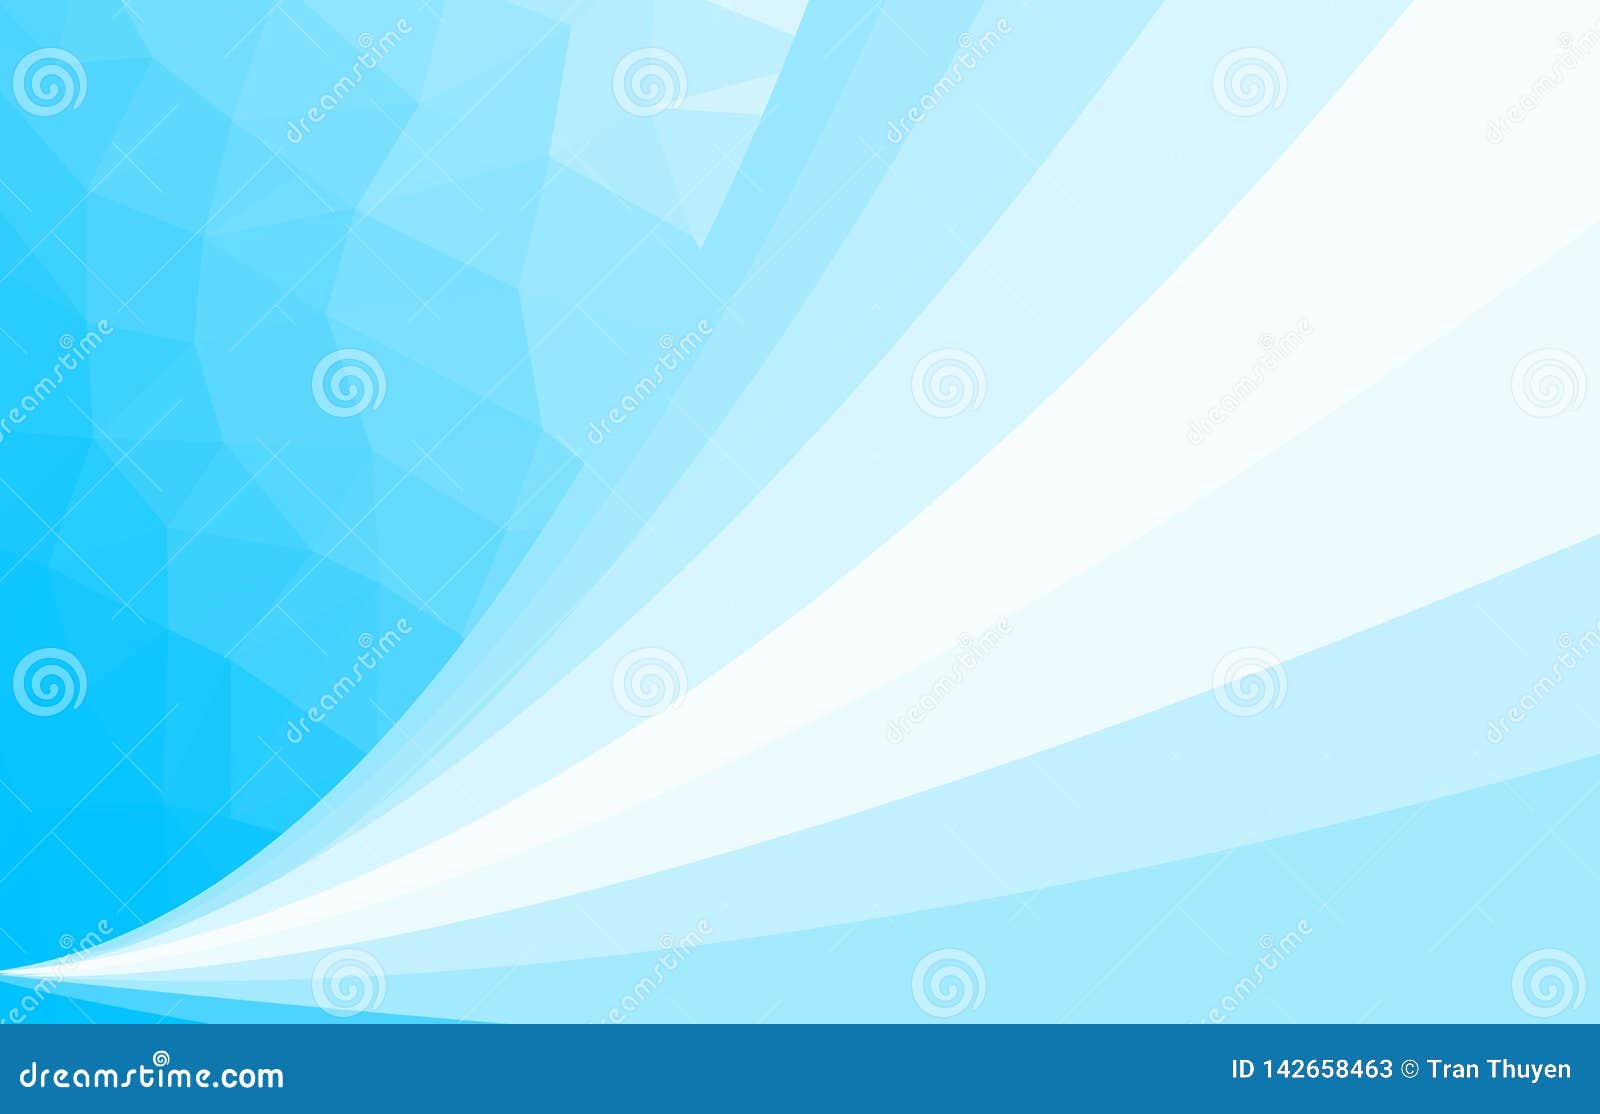 Blue and Light Abstract Background New Style Stock Illustration -  Illustration of abstract, card: 142658463